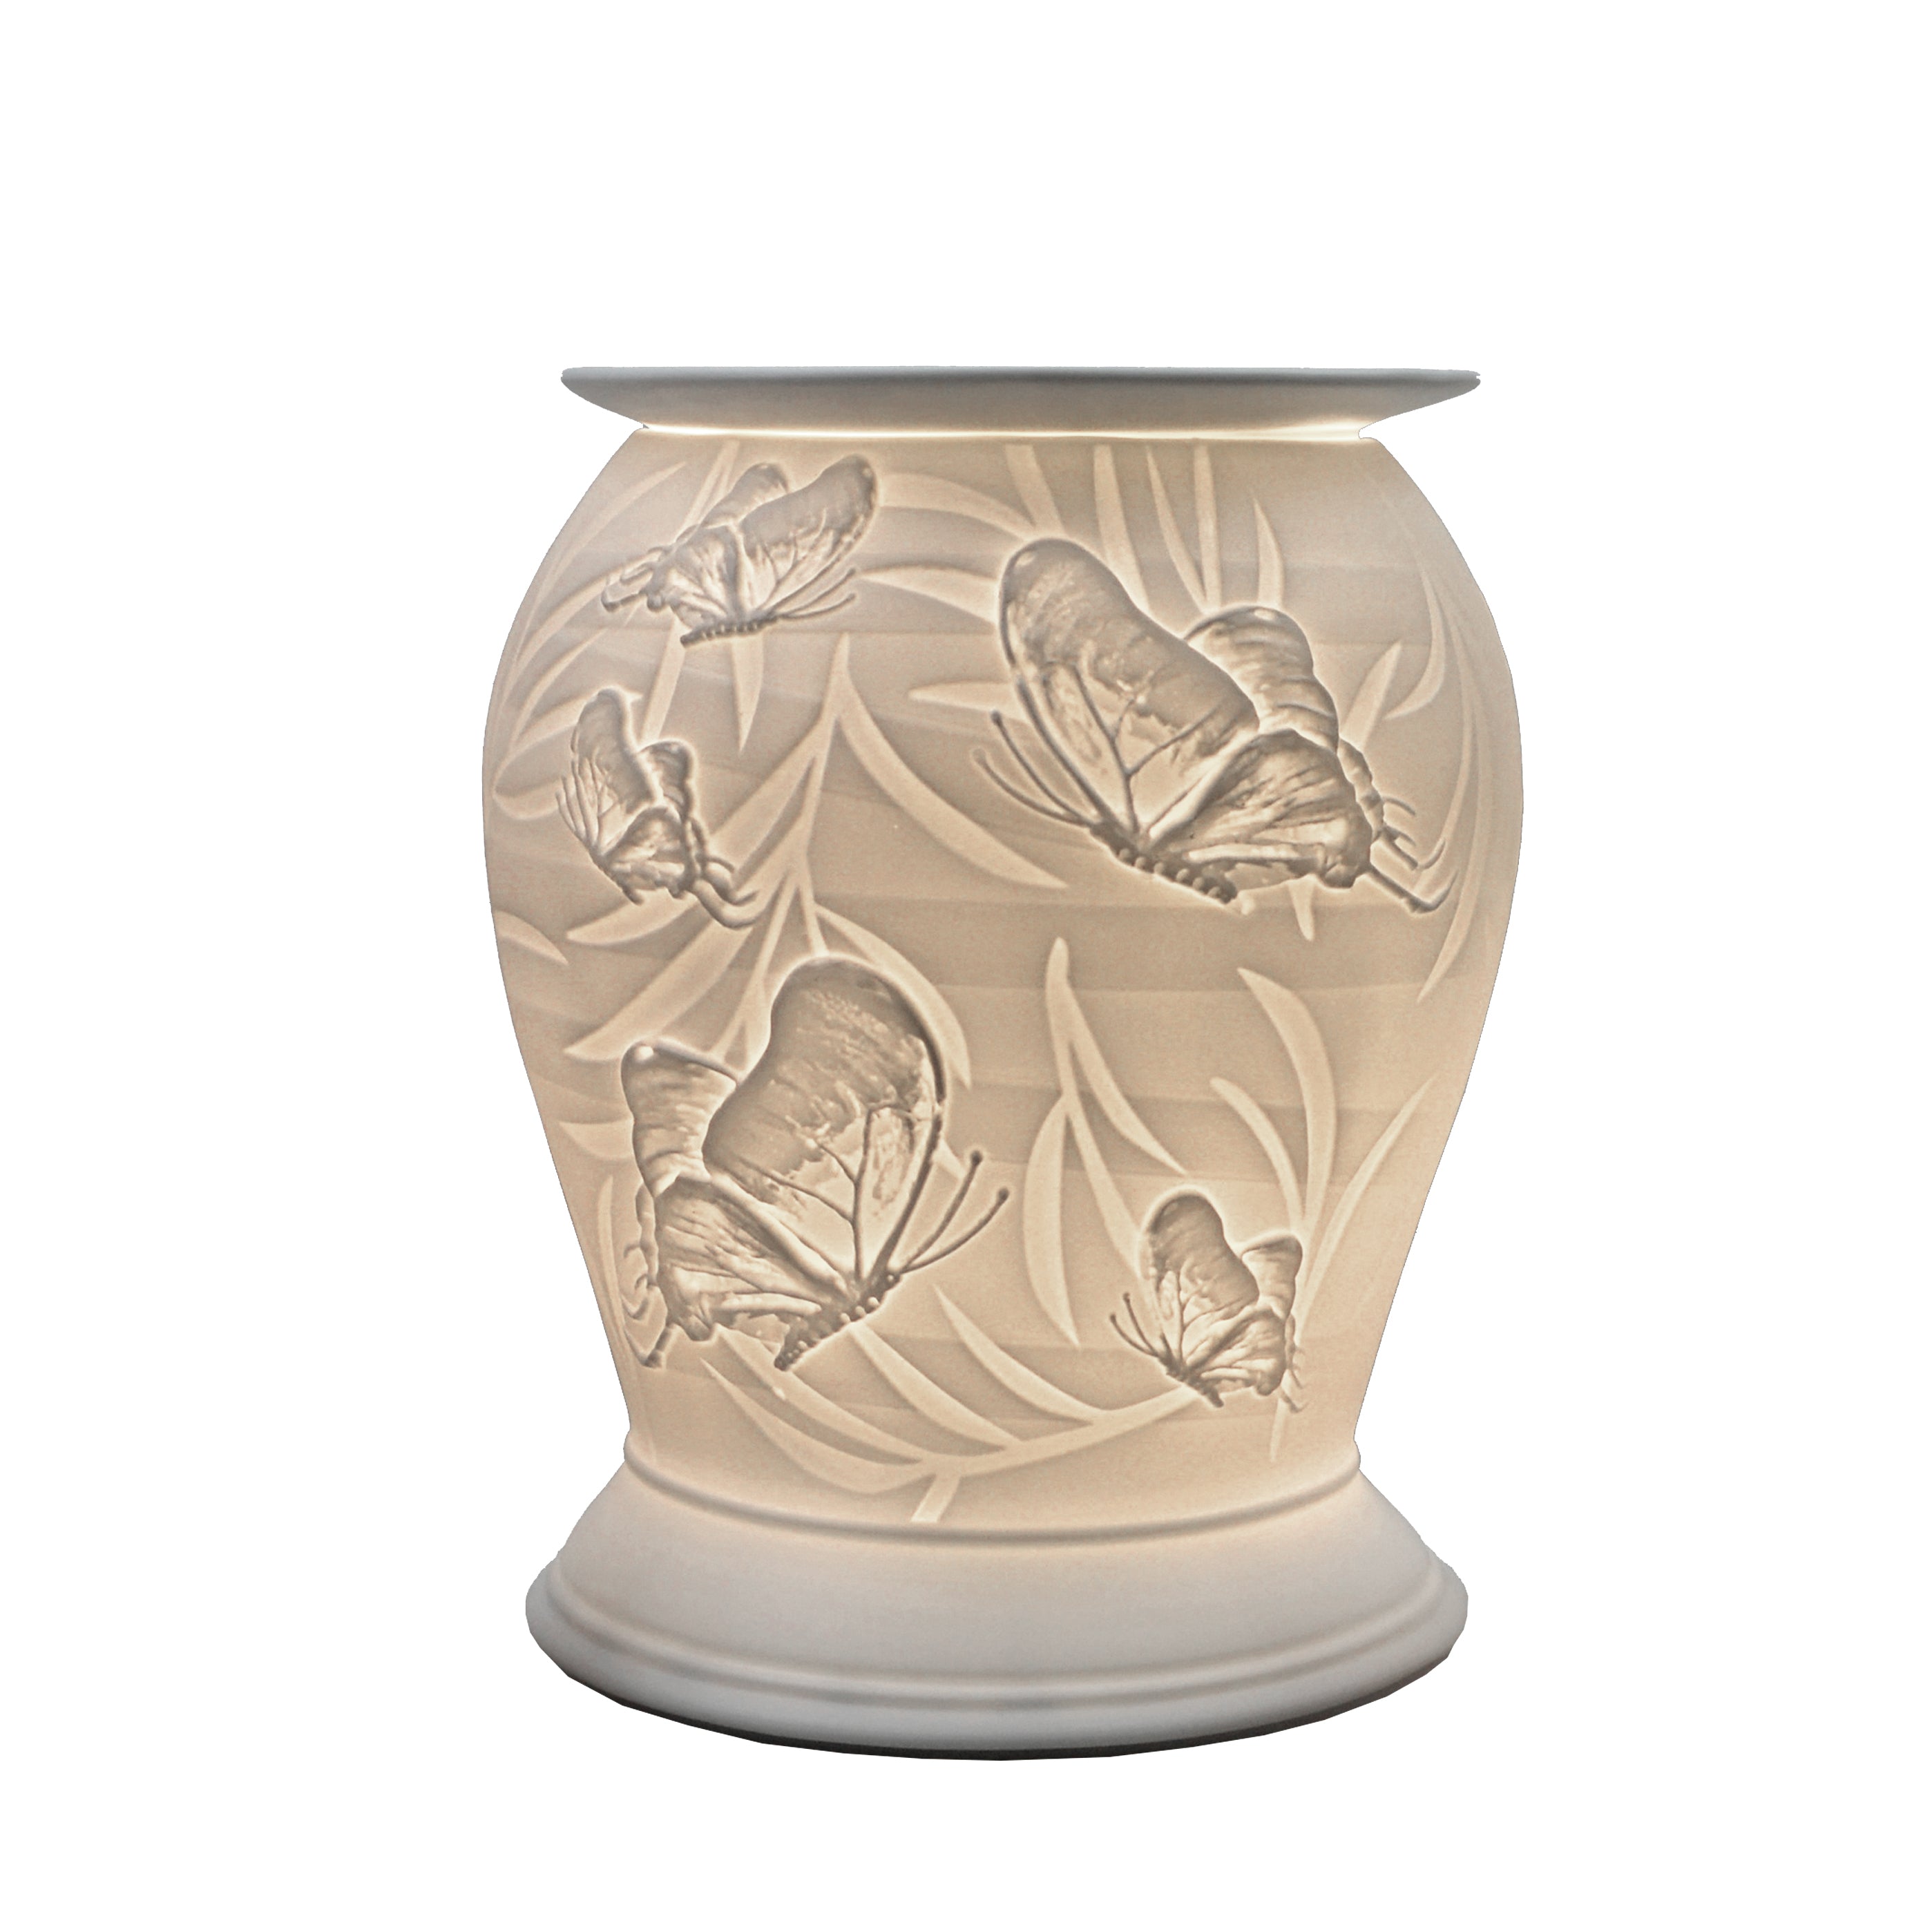 The porcelain material on this Wax Melt Burner allows bright light to shine through it, providing the opportunity to create this stunning Butterfly design. This is done by crafting images out of thicker and thinner sections of the porcelain, allowing for detailed shadowing and a 3D effect. The porcelains elegant look will fit perfectly in any room is available in a range of designs and two different shapes.